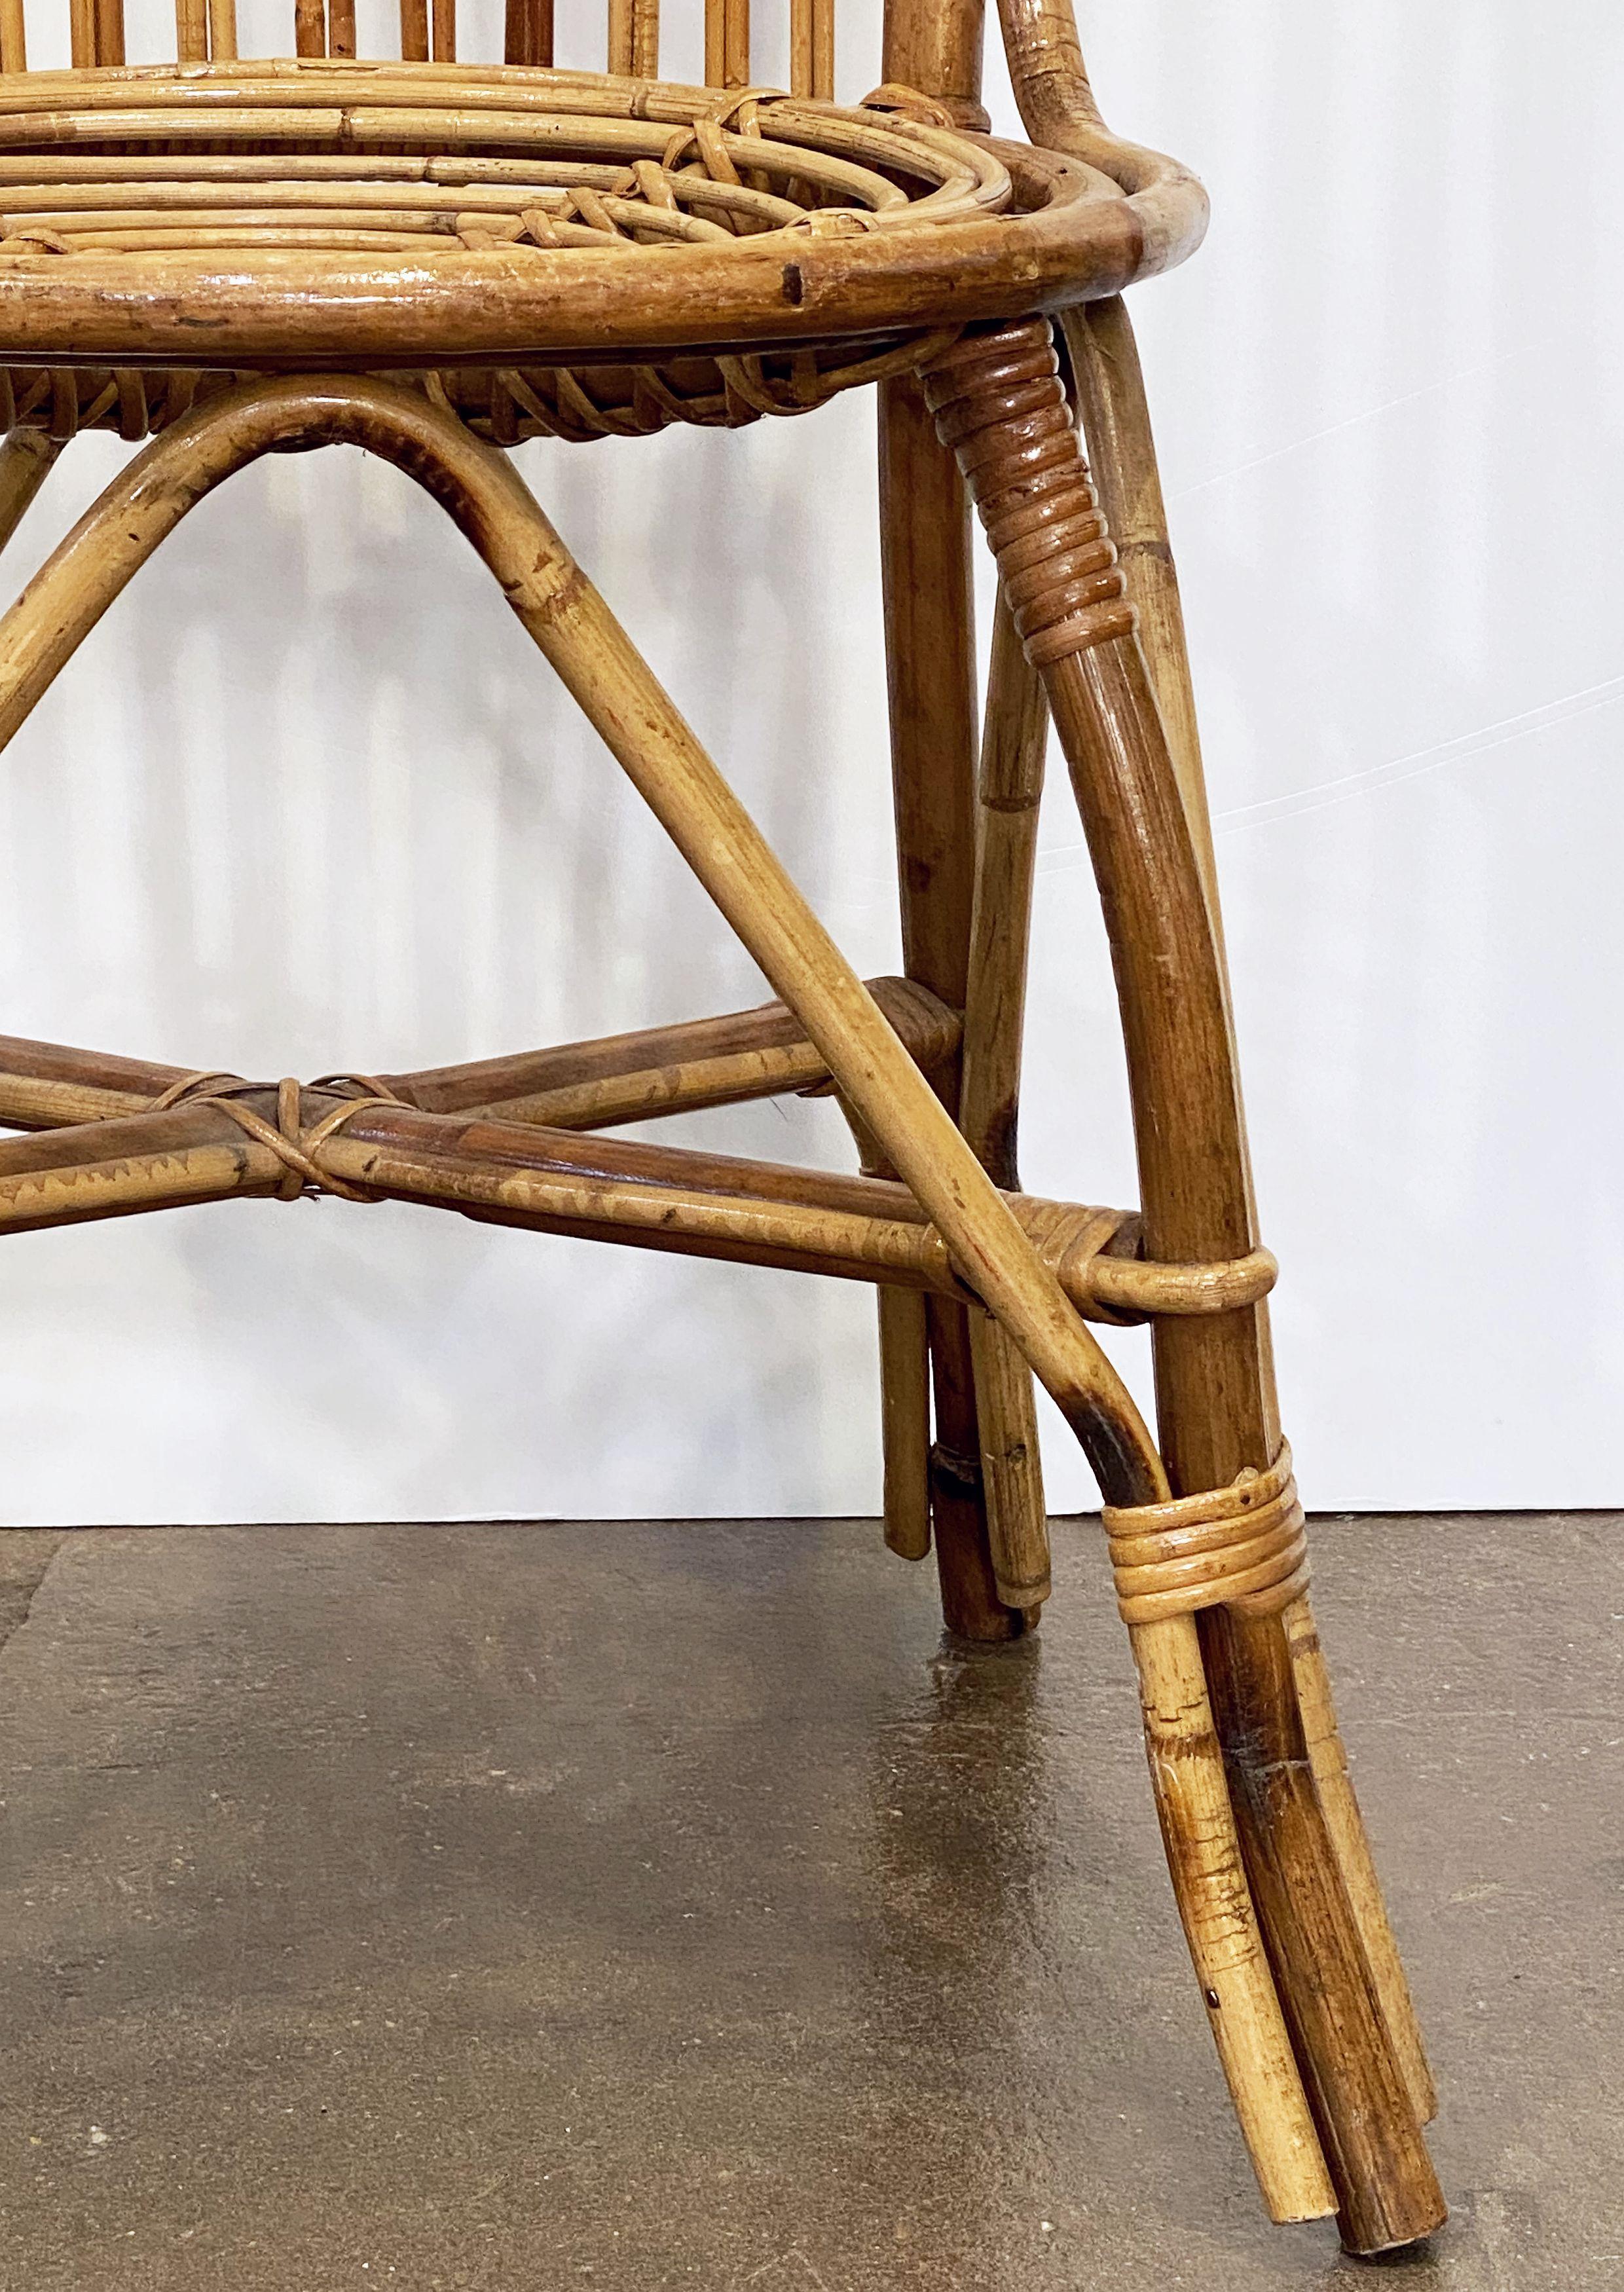 Italian Fan-Backed Chair of Rattan and Bamboo from the Mid-20th Century For Sale 6